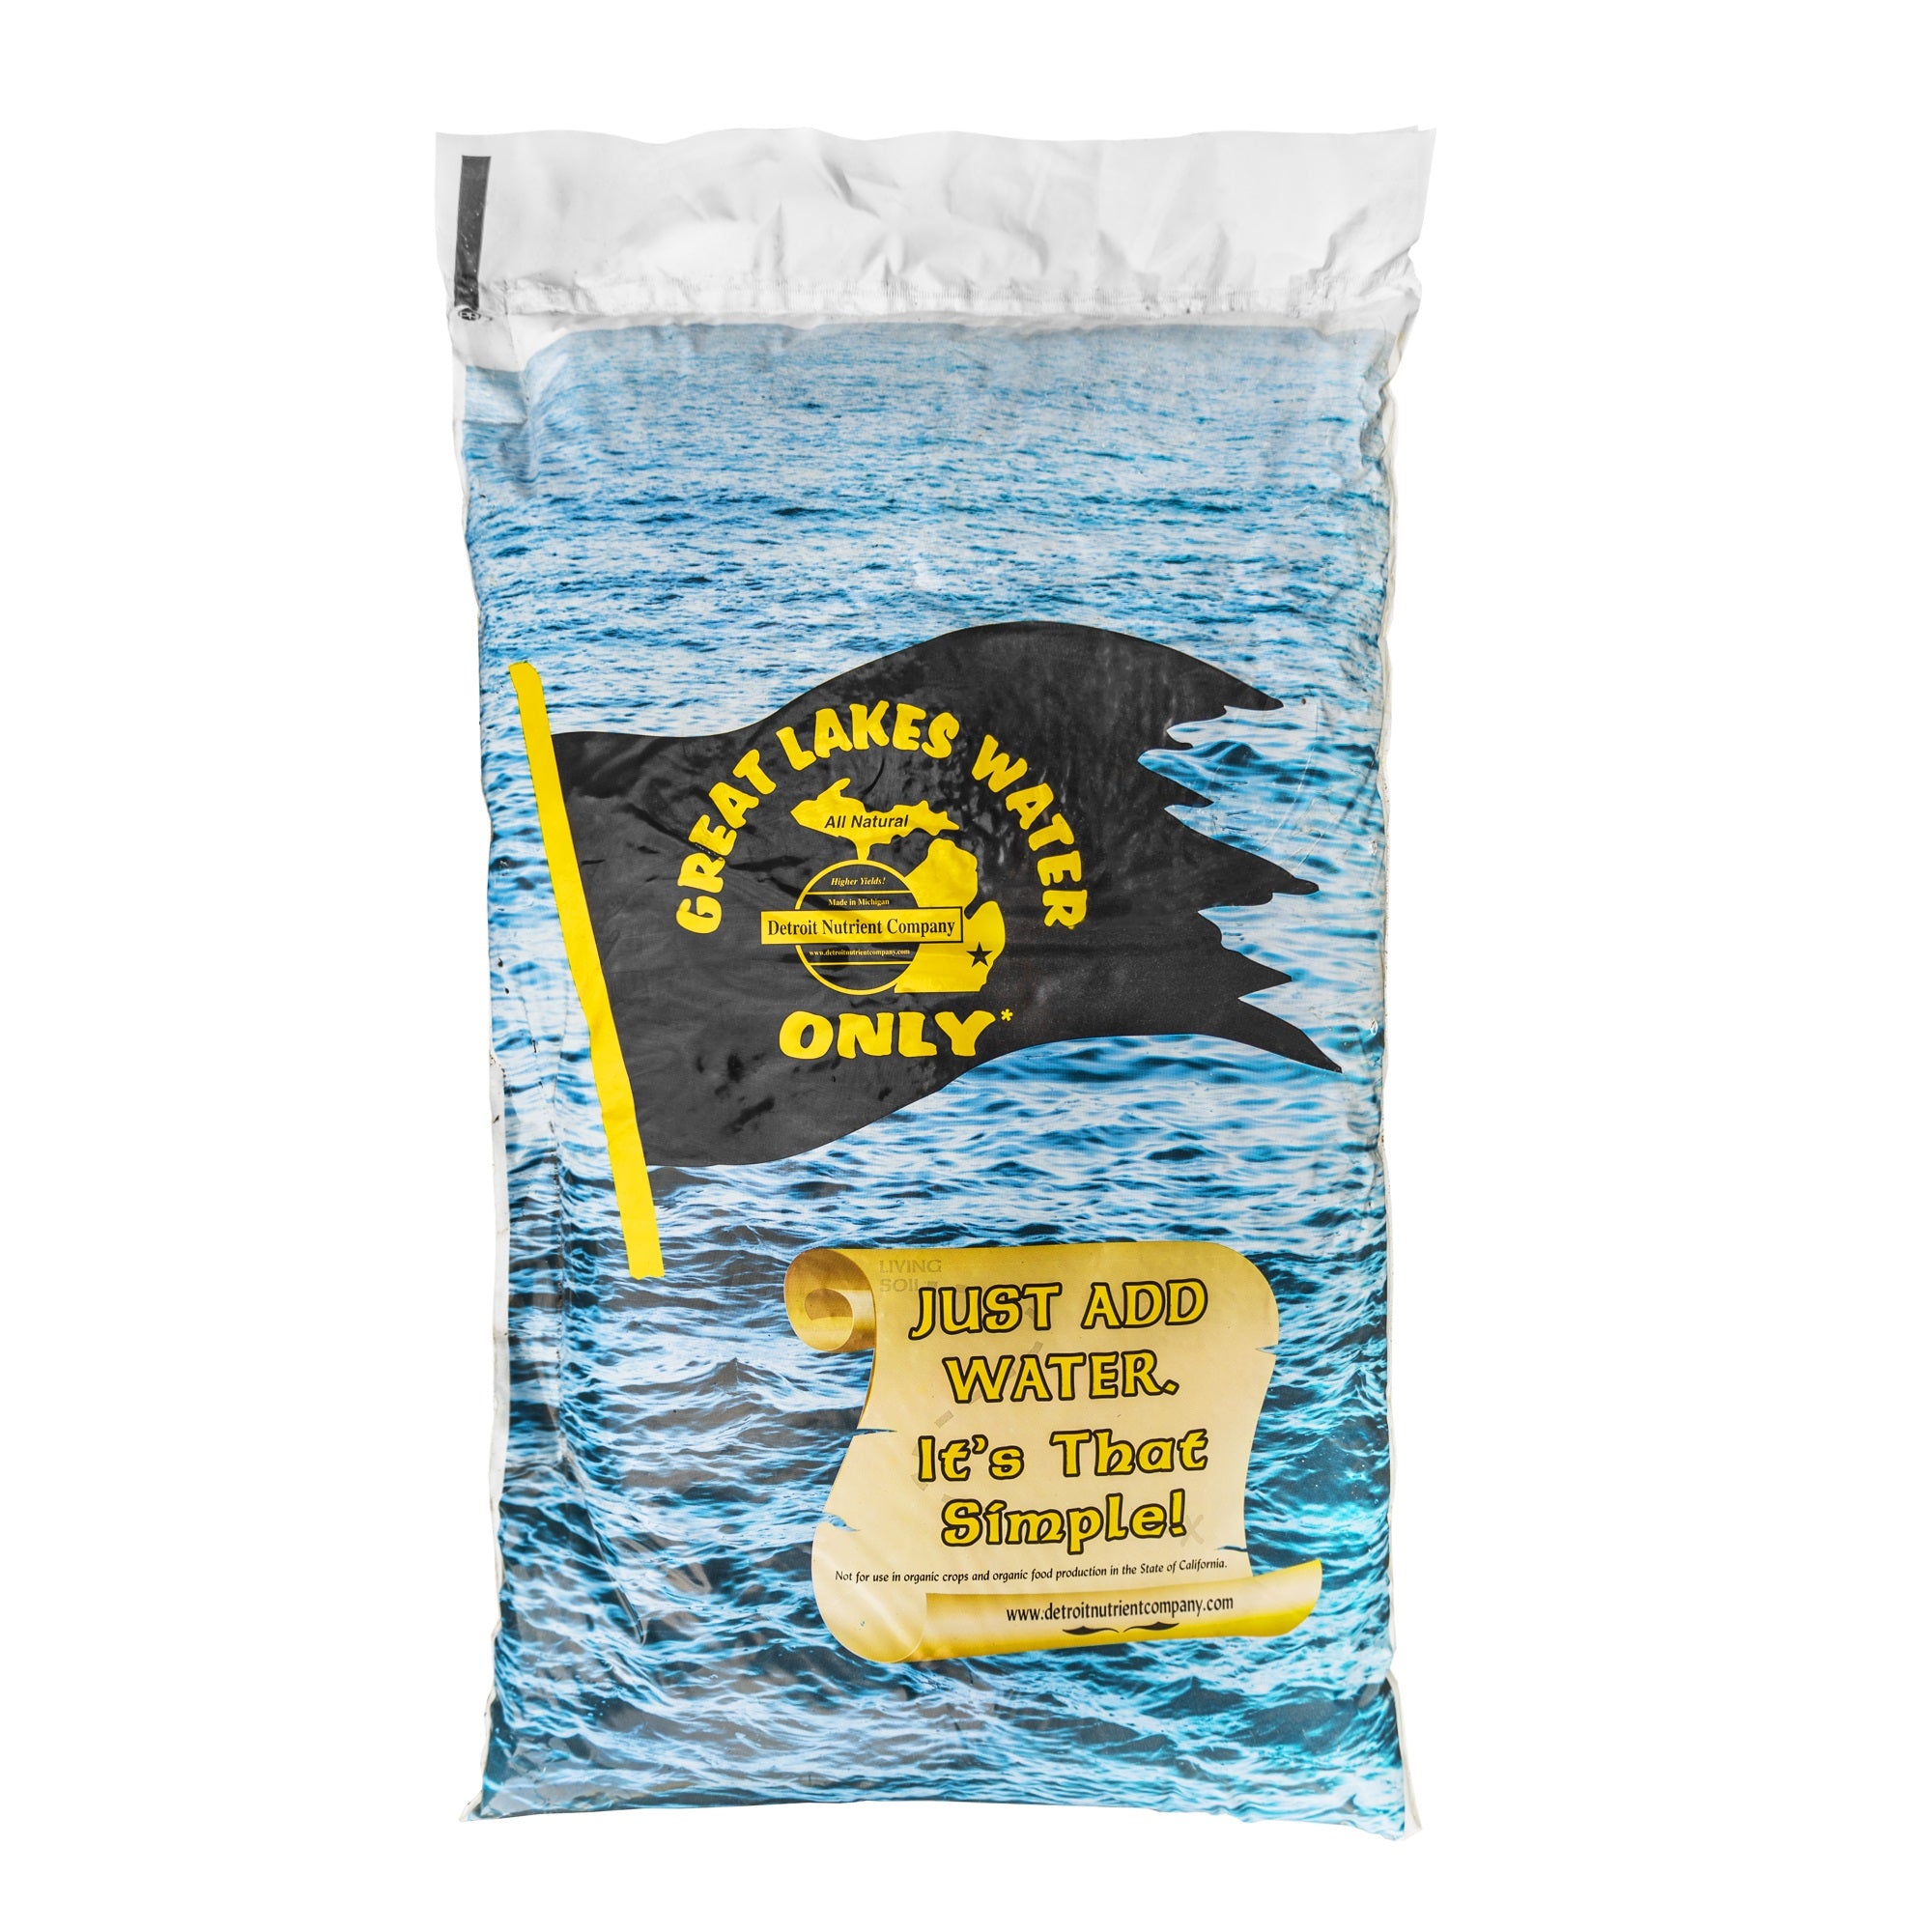 DNC Great Lakes All Natural Water Only Soil, 15 Pound Bag